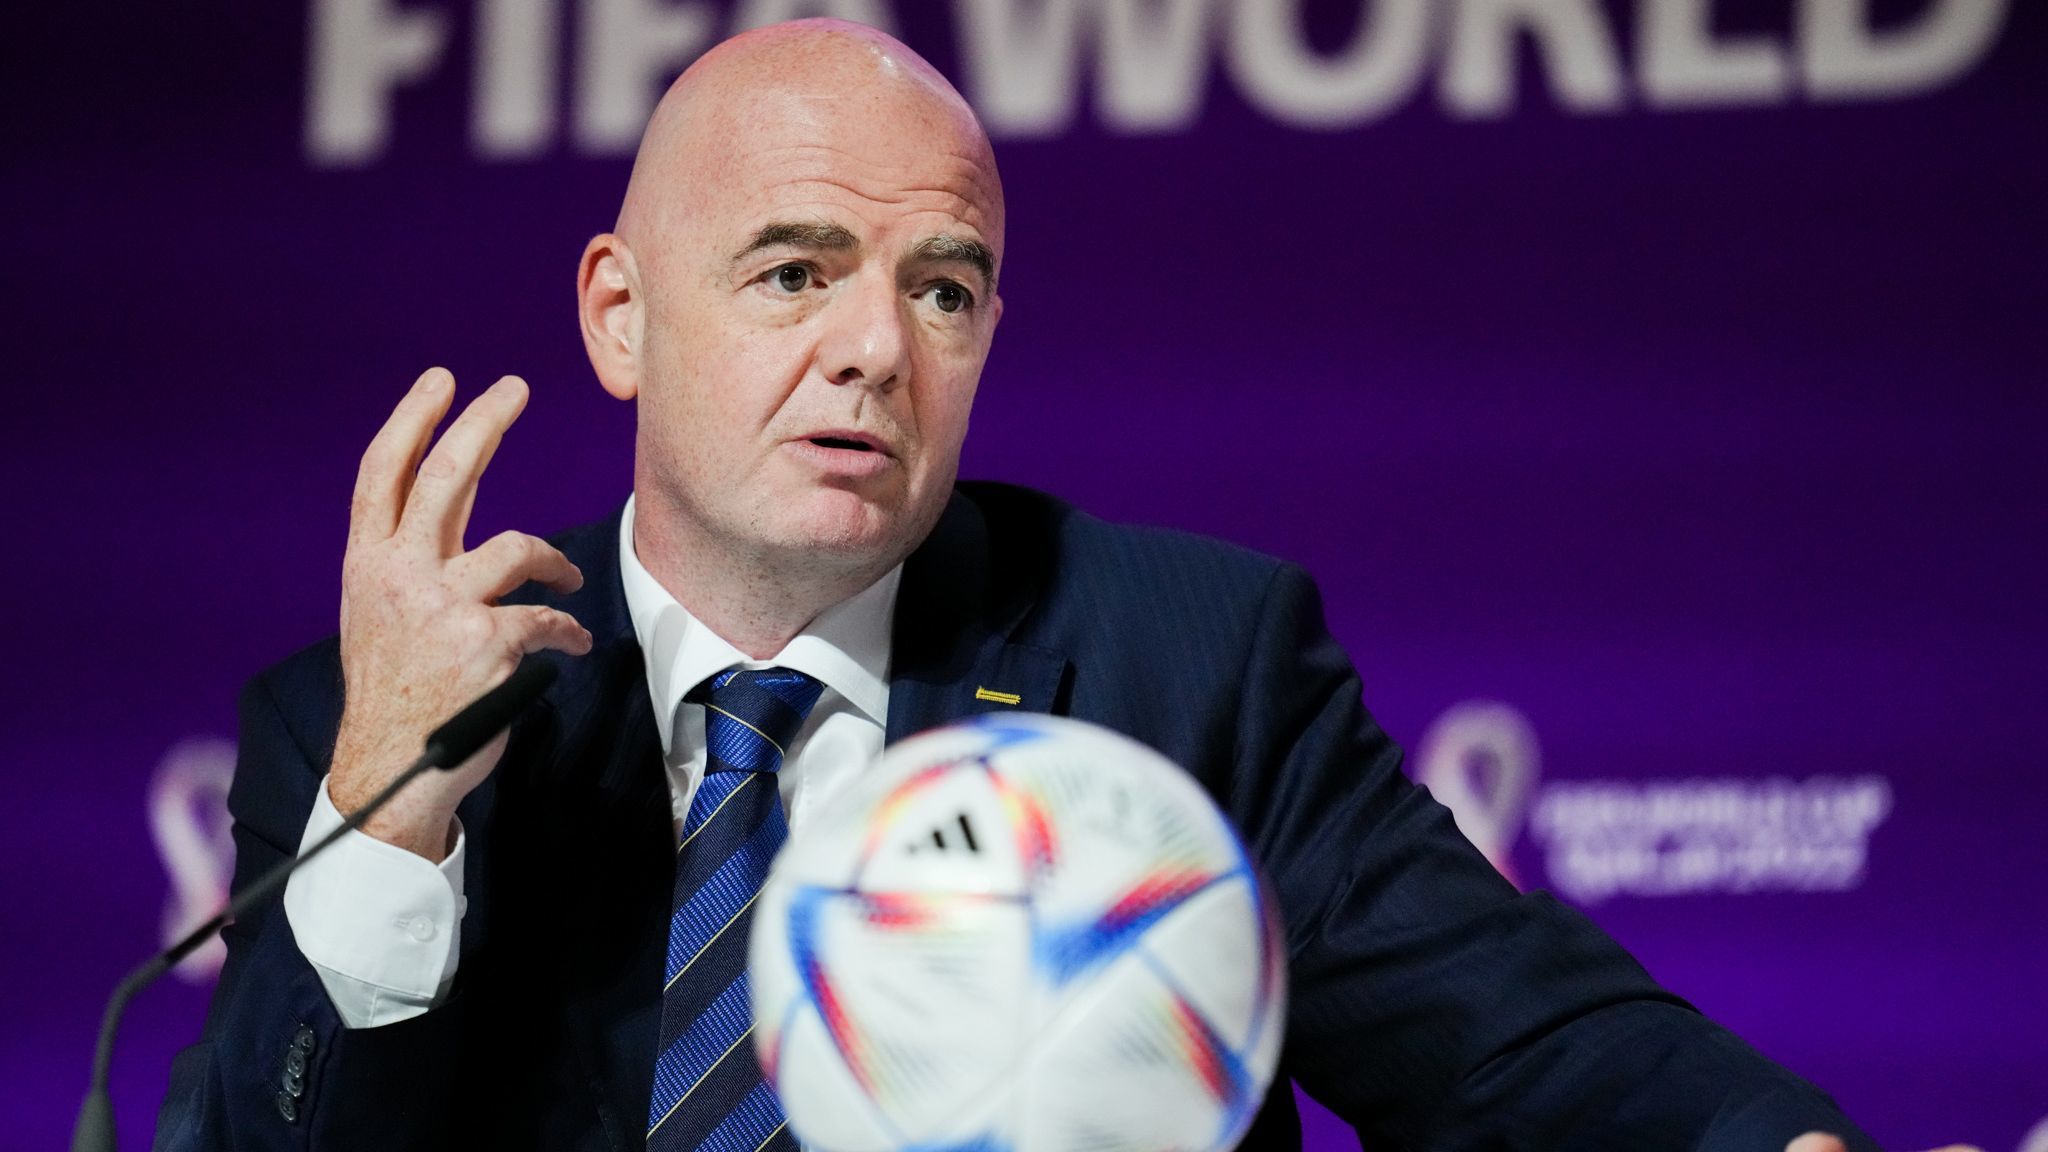 FIFA head Infantino calls the Qatar World Cup group stage the best in history